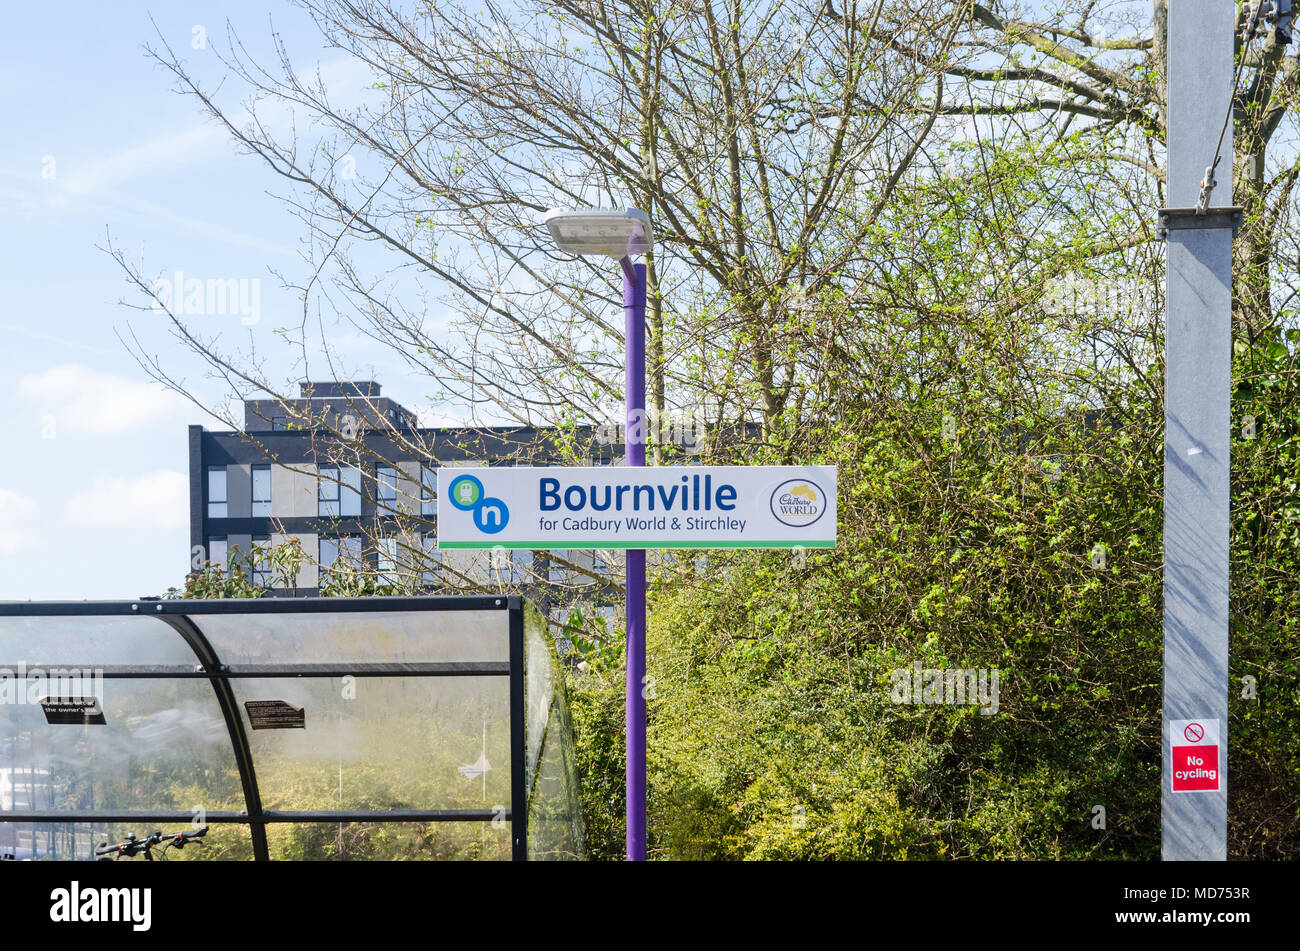 Bournville train station which serves the Cadbury chocolate factory and Cadbury World in Bournville Lane,Bournville, Birmingham, UK Stock Photo